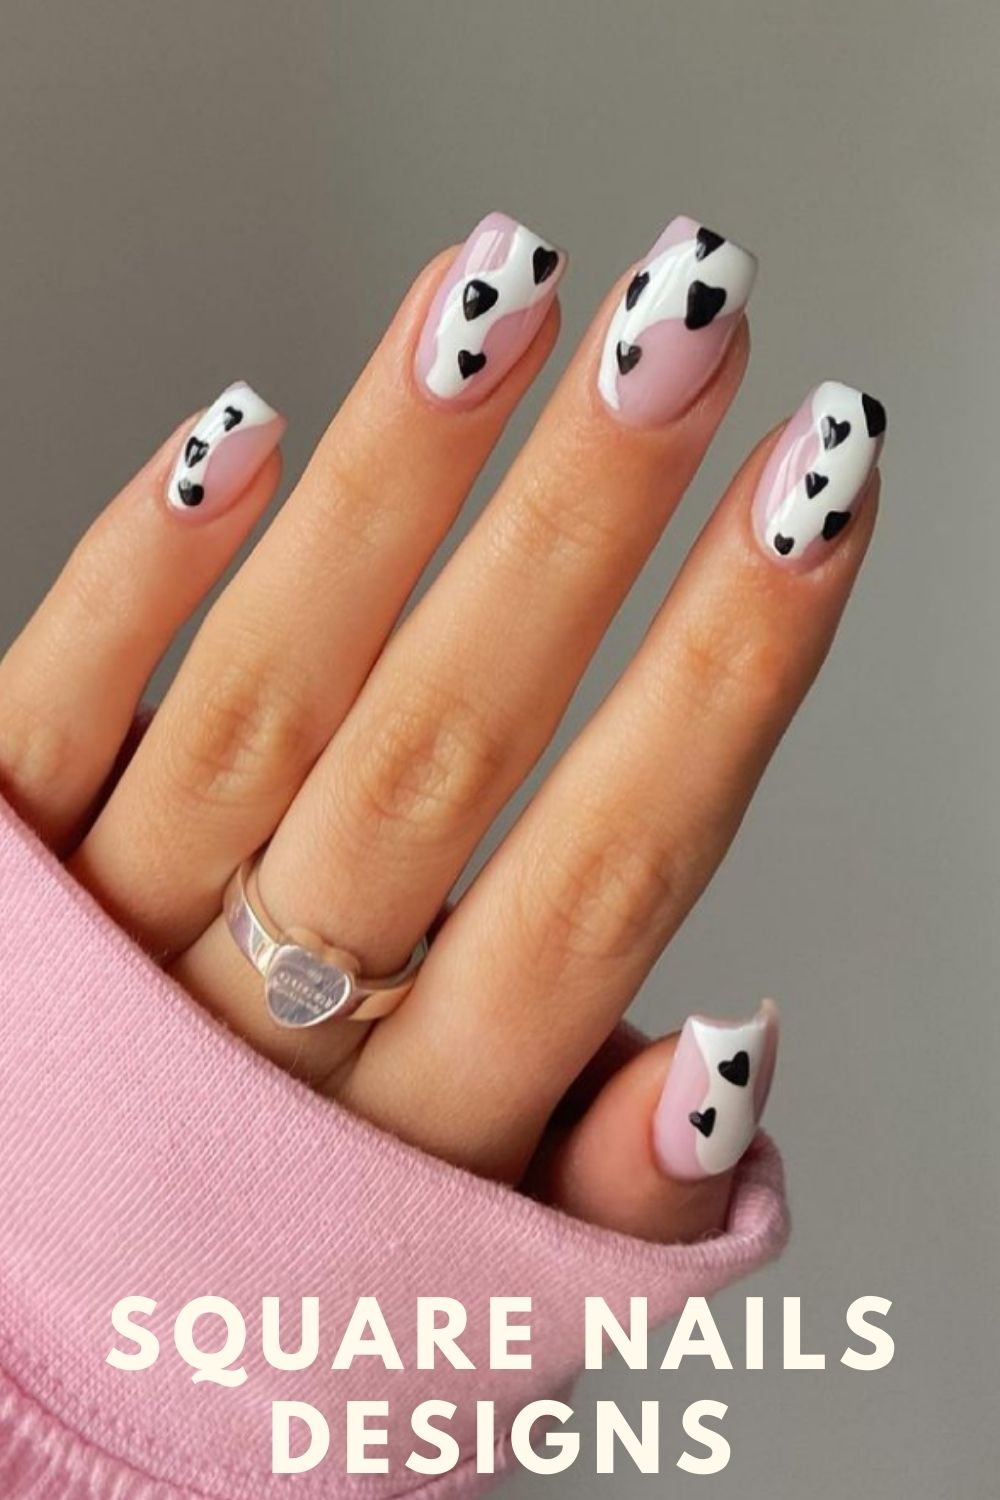 White and pink square acrylic nails with black love heart